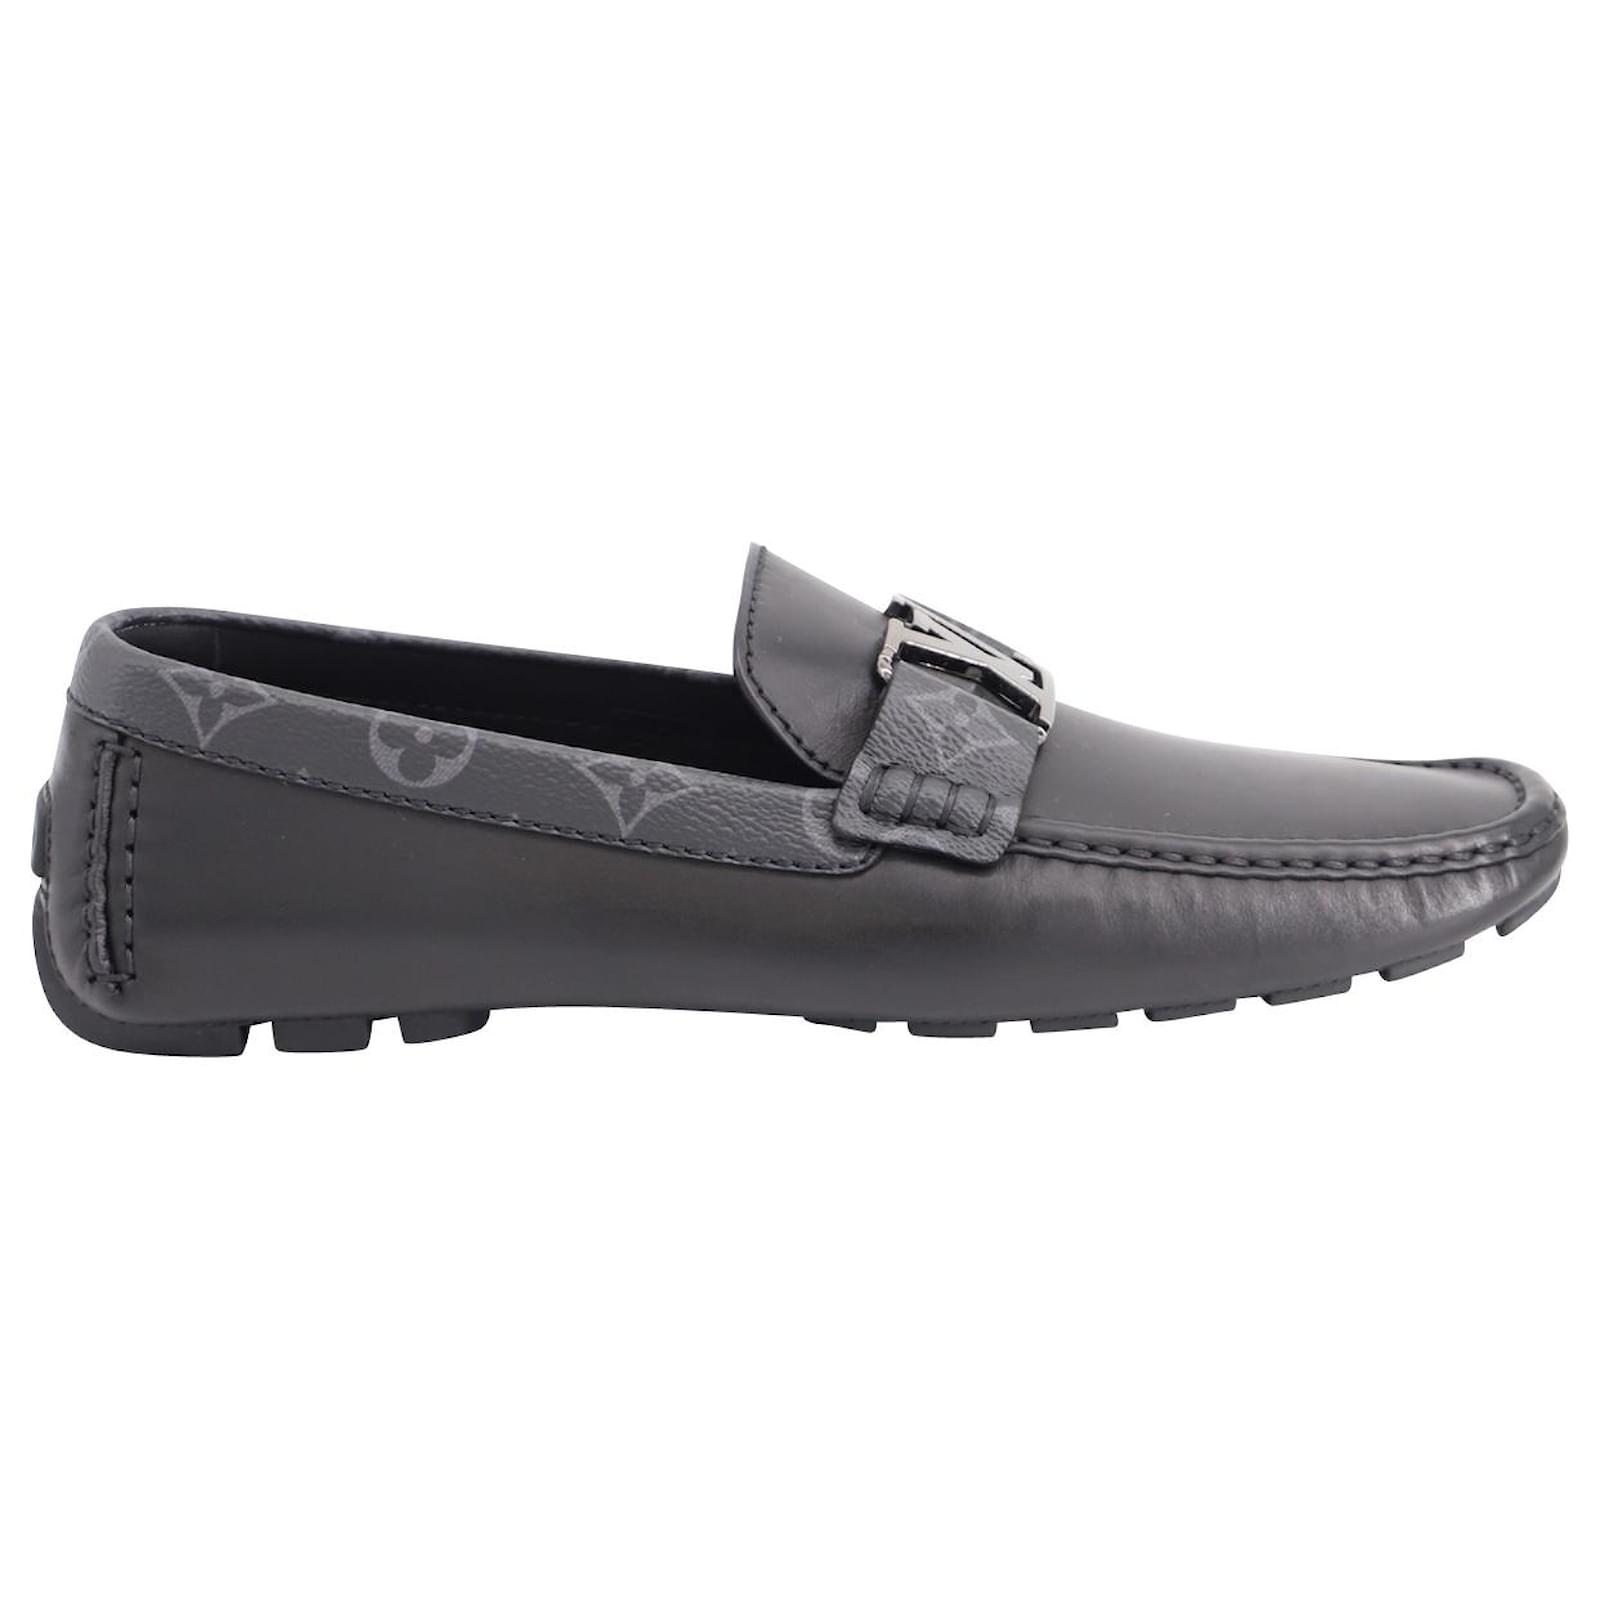 Louis Vuitton Monte Carlo Moccasin in Black Calfskin Leather Pony